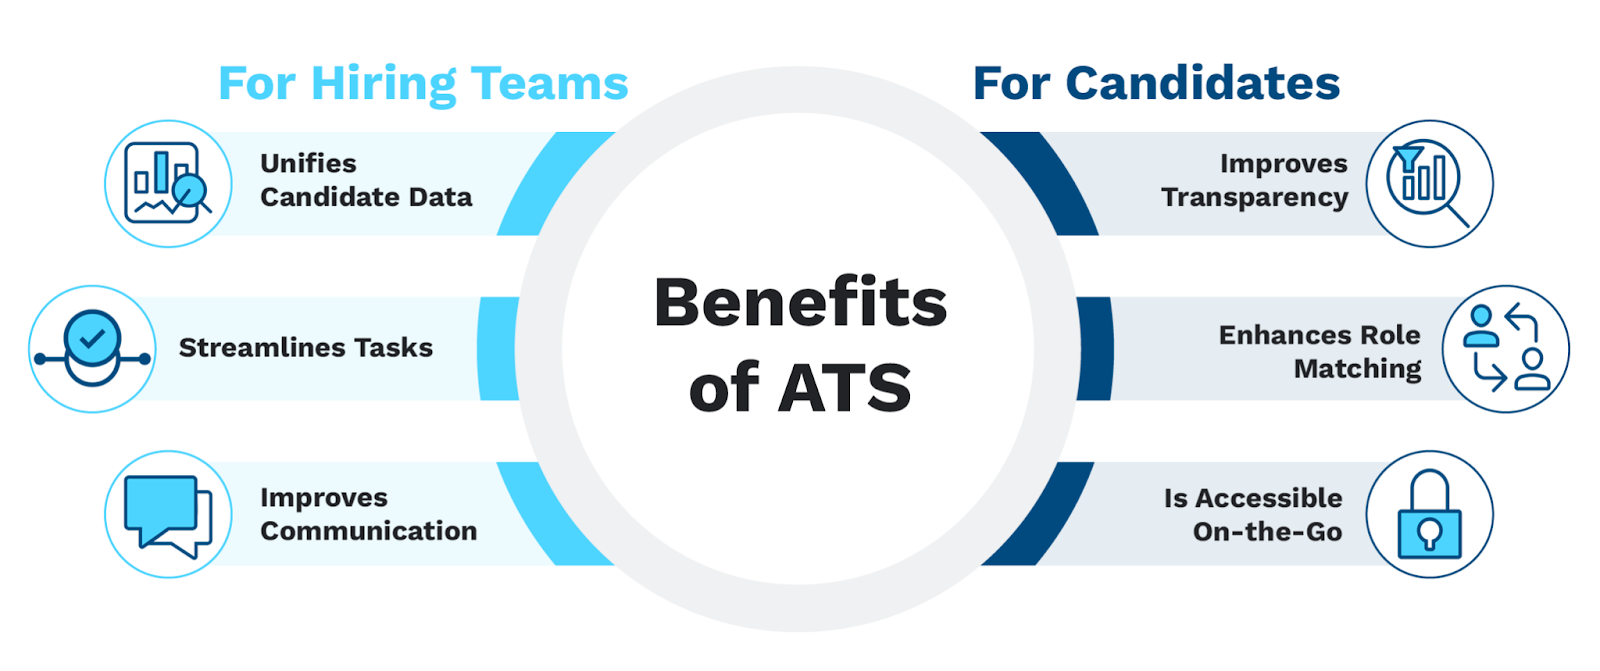 The benefits of applicant tracking systems (as explained below)